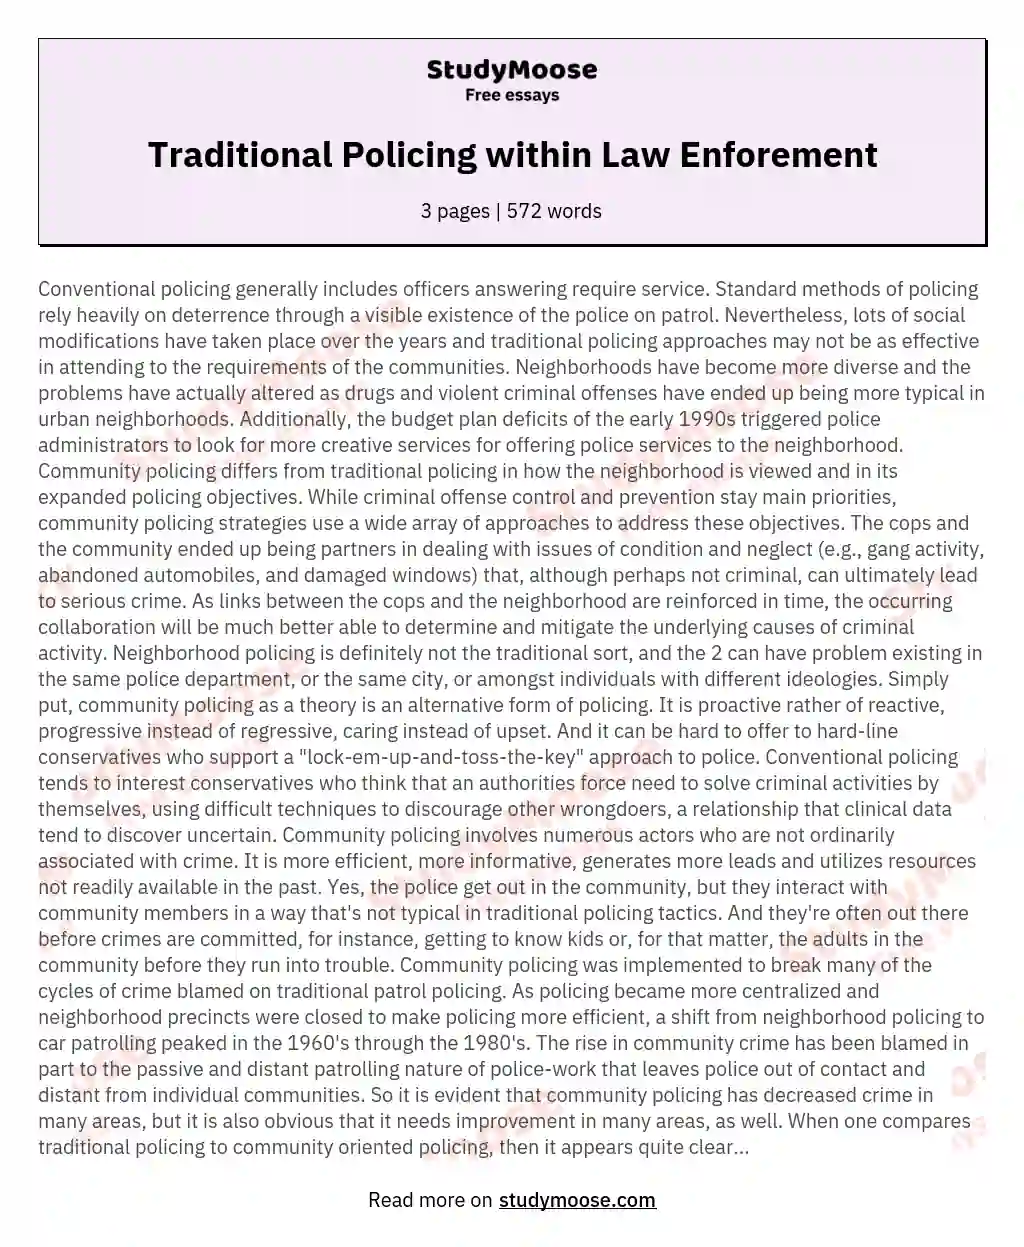 Traditional Policing within Law Enforement essay